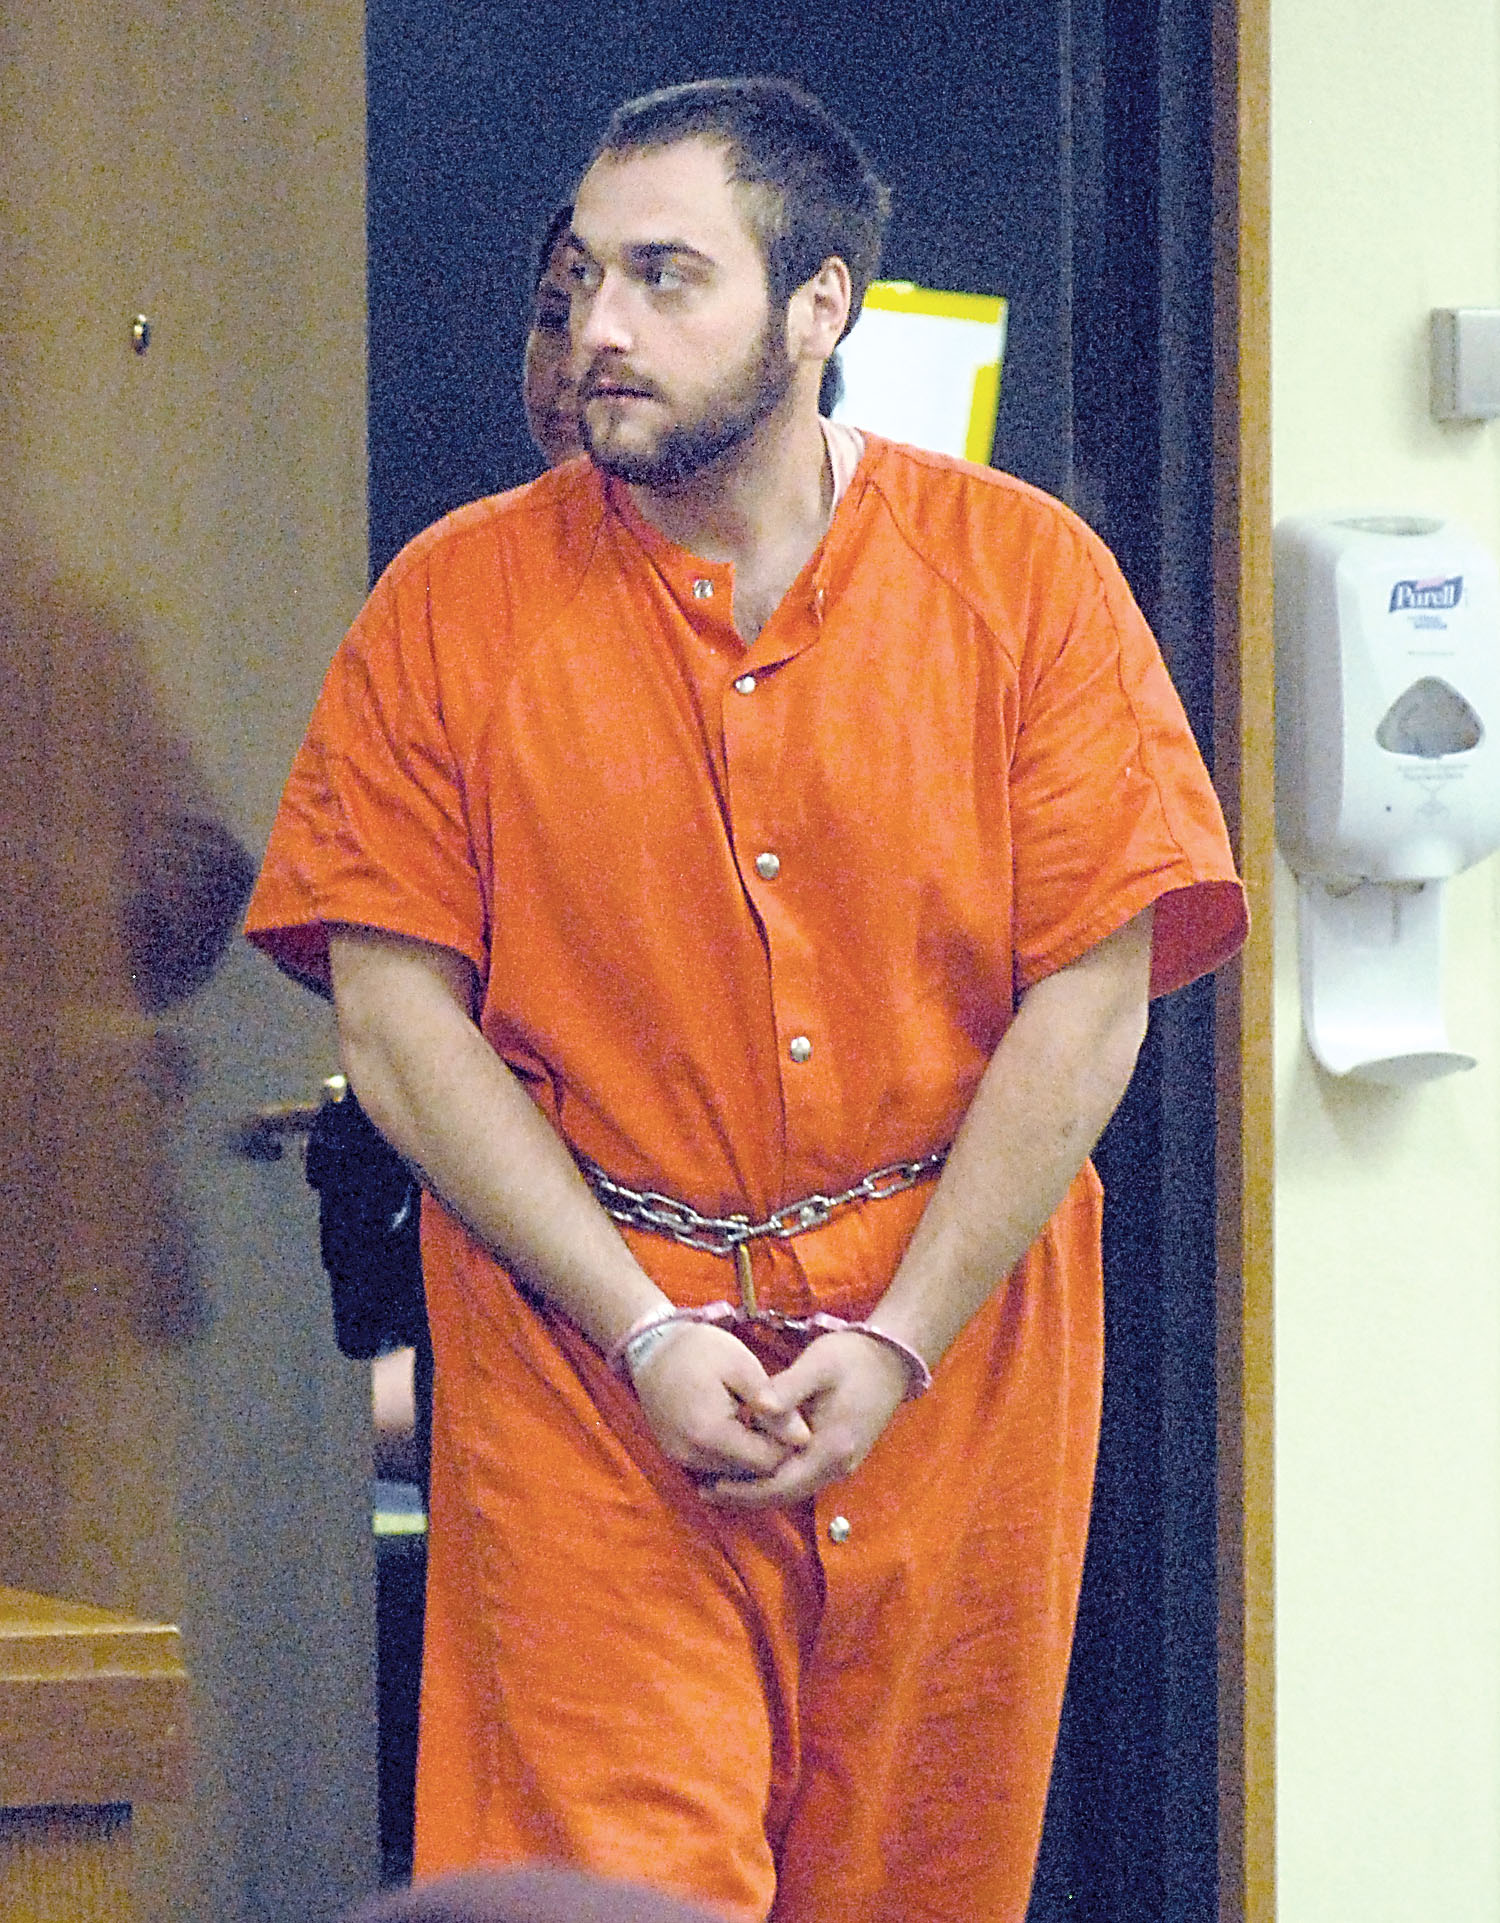 Corey Borden arrives for his first appearance in Clallam County Superior Court in Port Angeles on Wednesday. Keith Thorpe/Peninsula Daily News